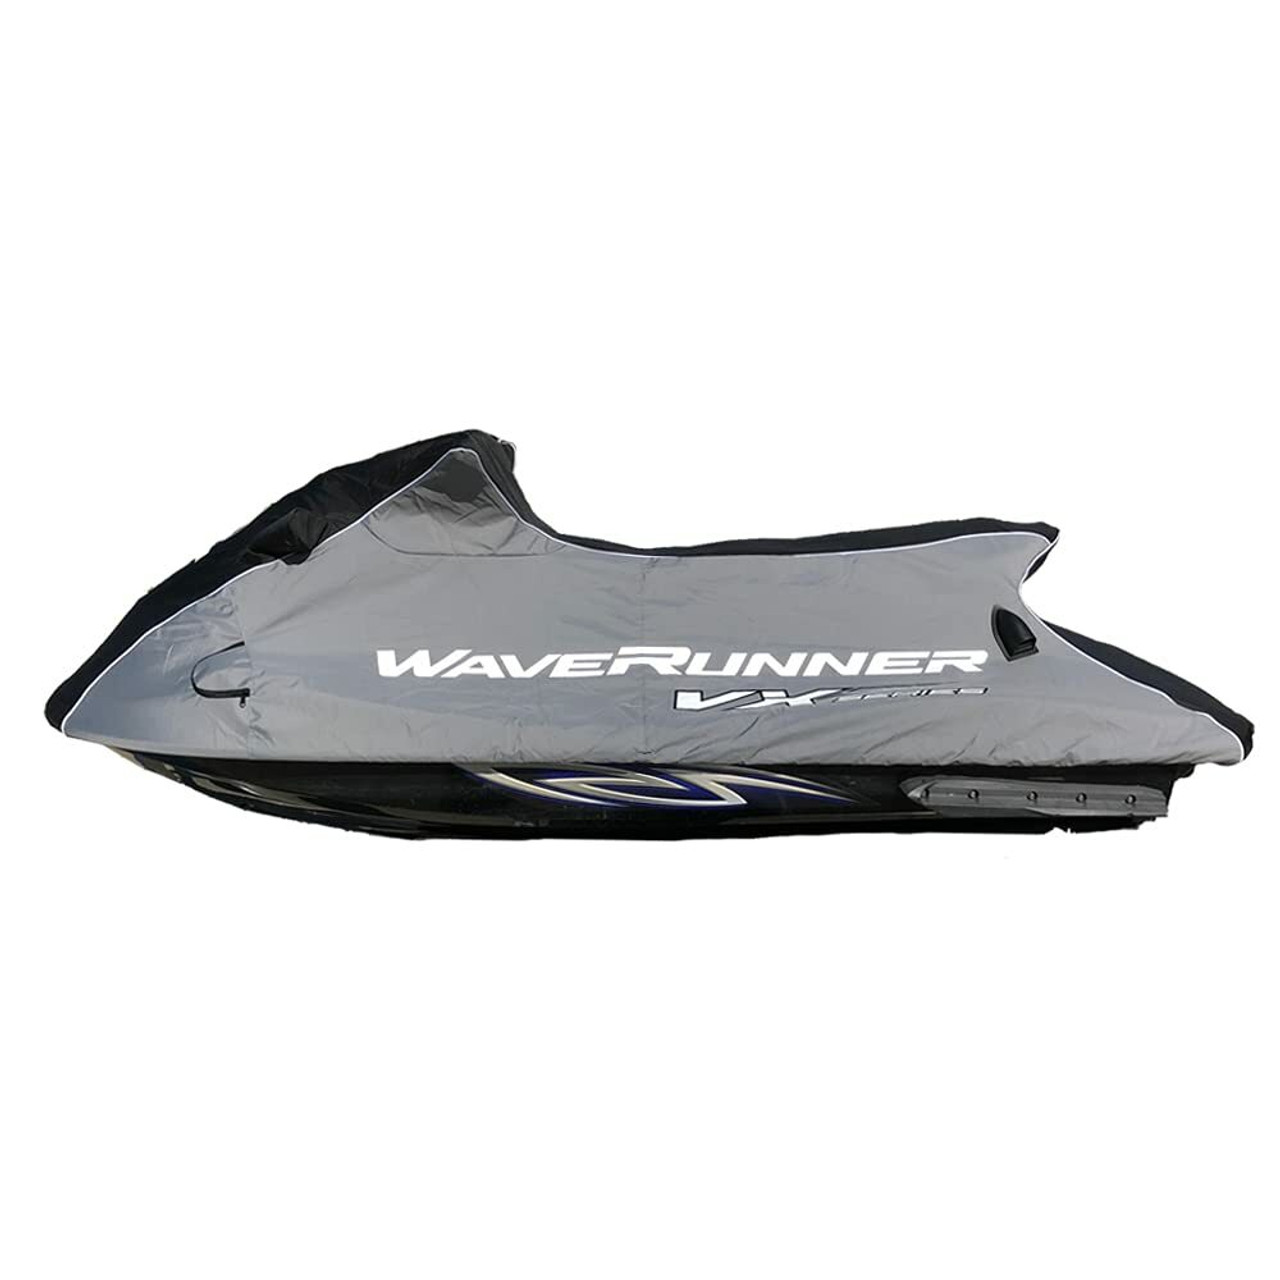 COVERS - BOAT, OUTBOARD, PWC - YAMAHA WAVERUNNER Covers - Page 1